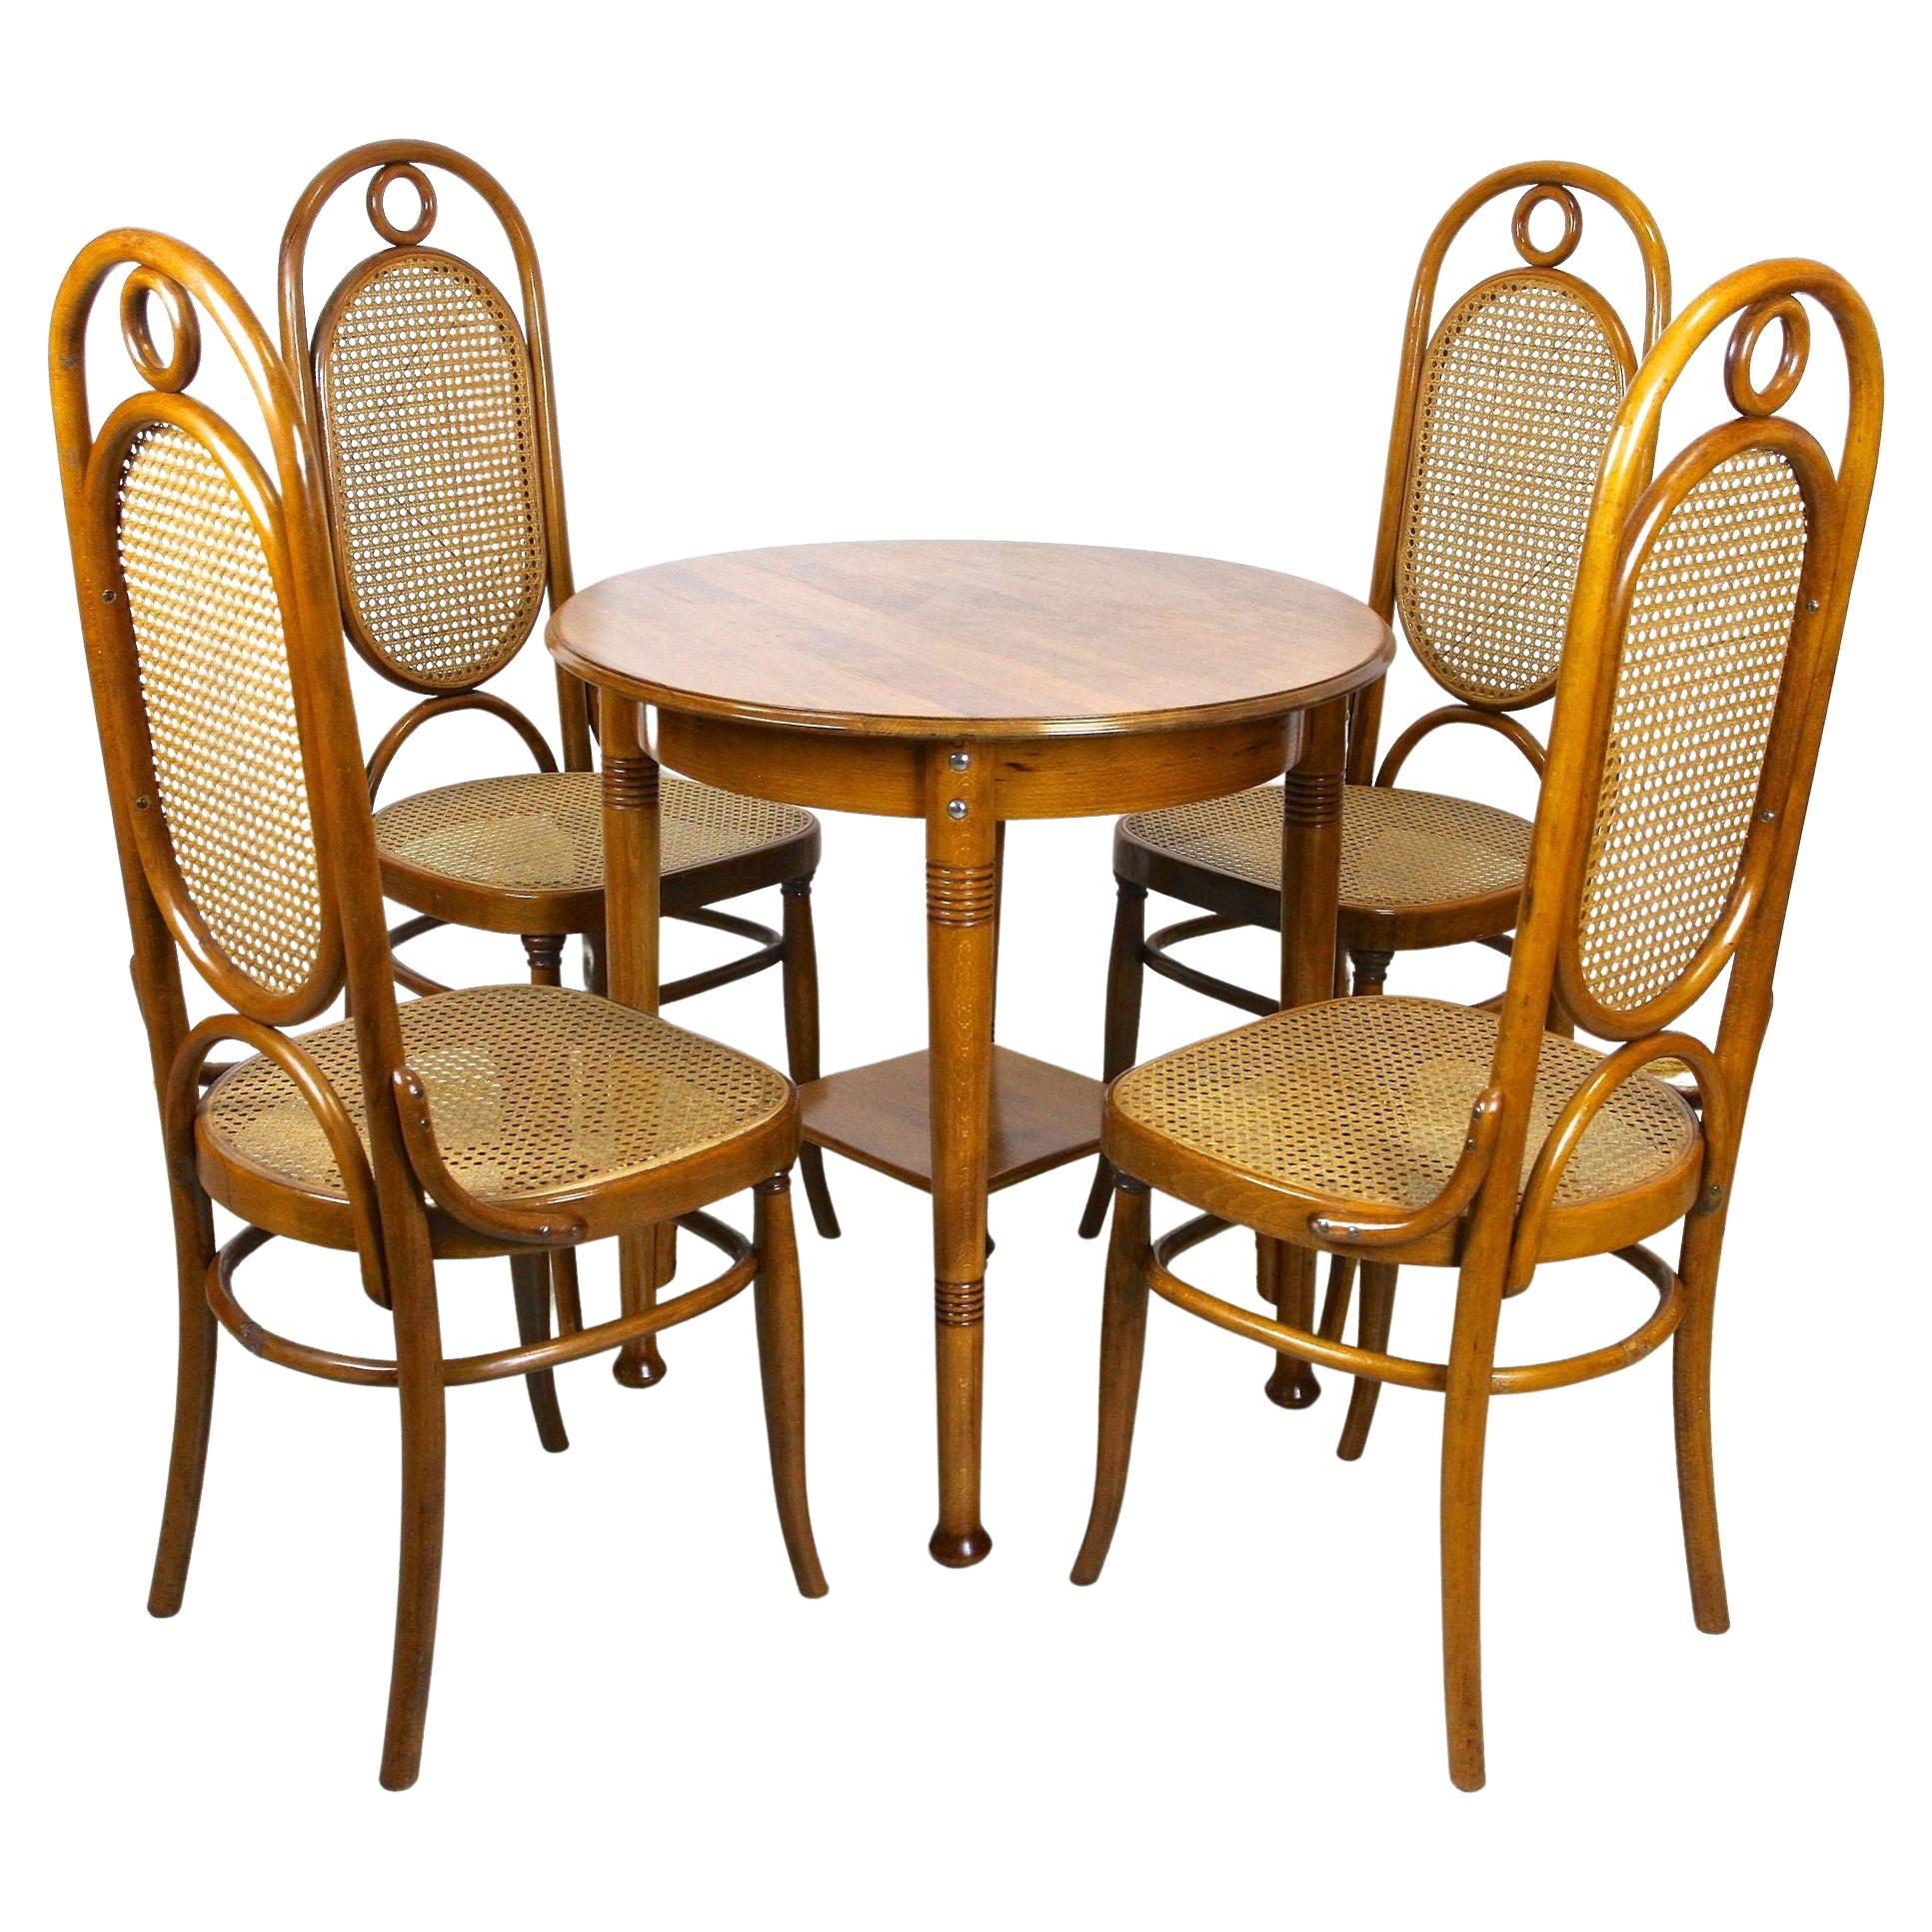 Thonet Bentwood Chairs with Table, Art Nouveau Seating Set, Austria, circa 1915